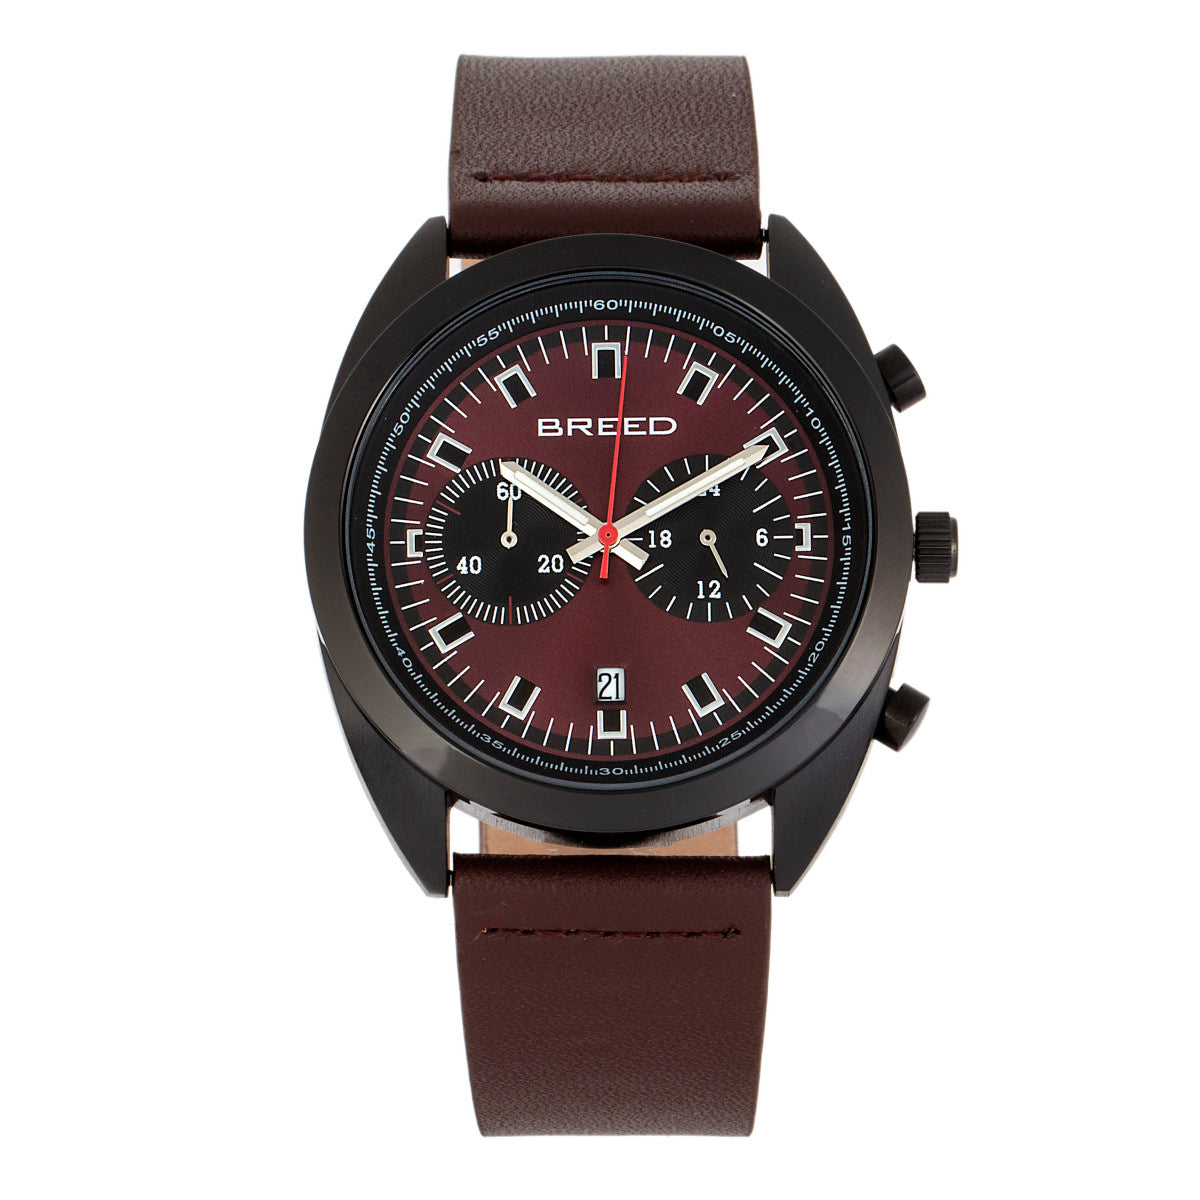 Breed Racer Chronograph Leather-Band Watch w/Date - Black/Maroon - BRD8507